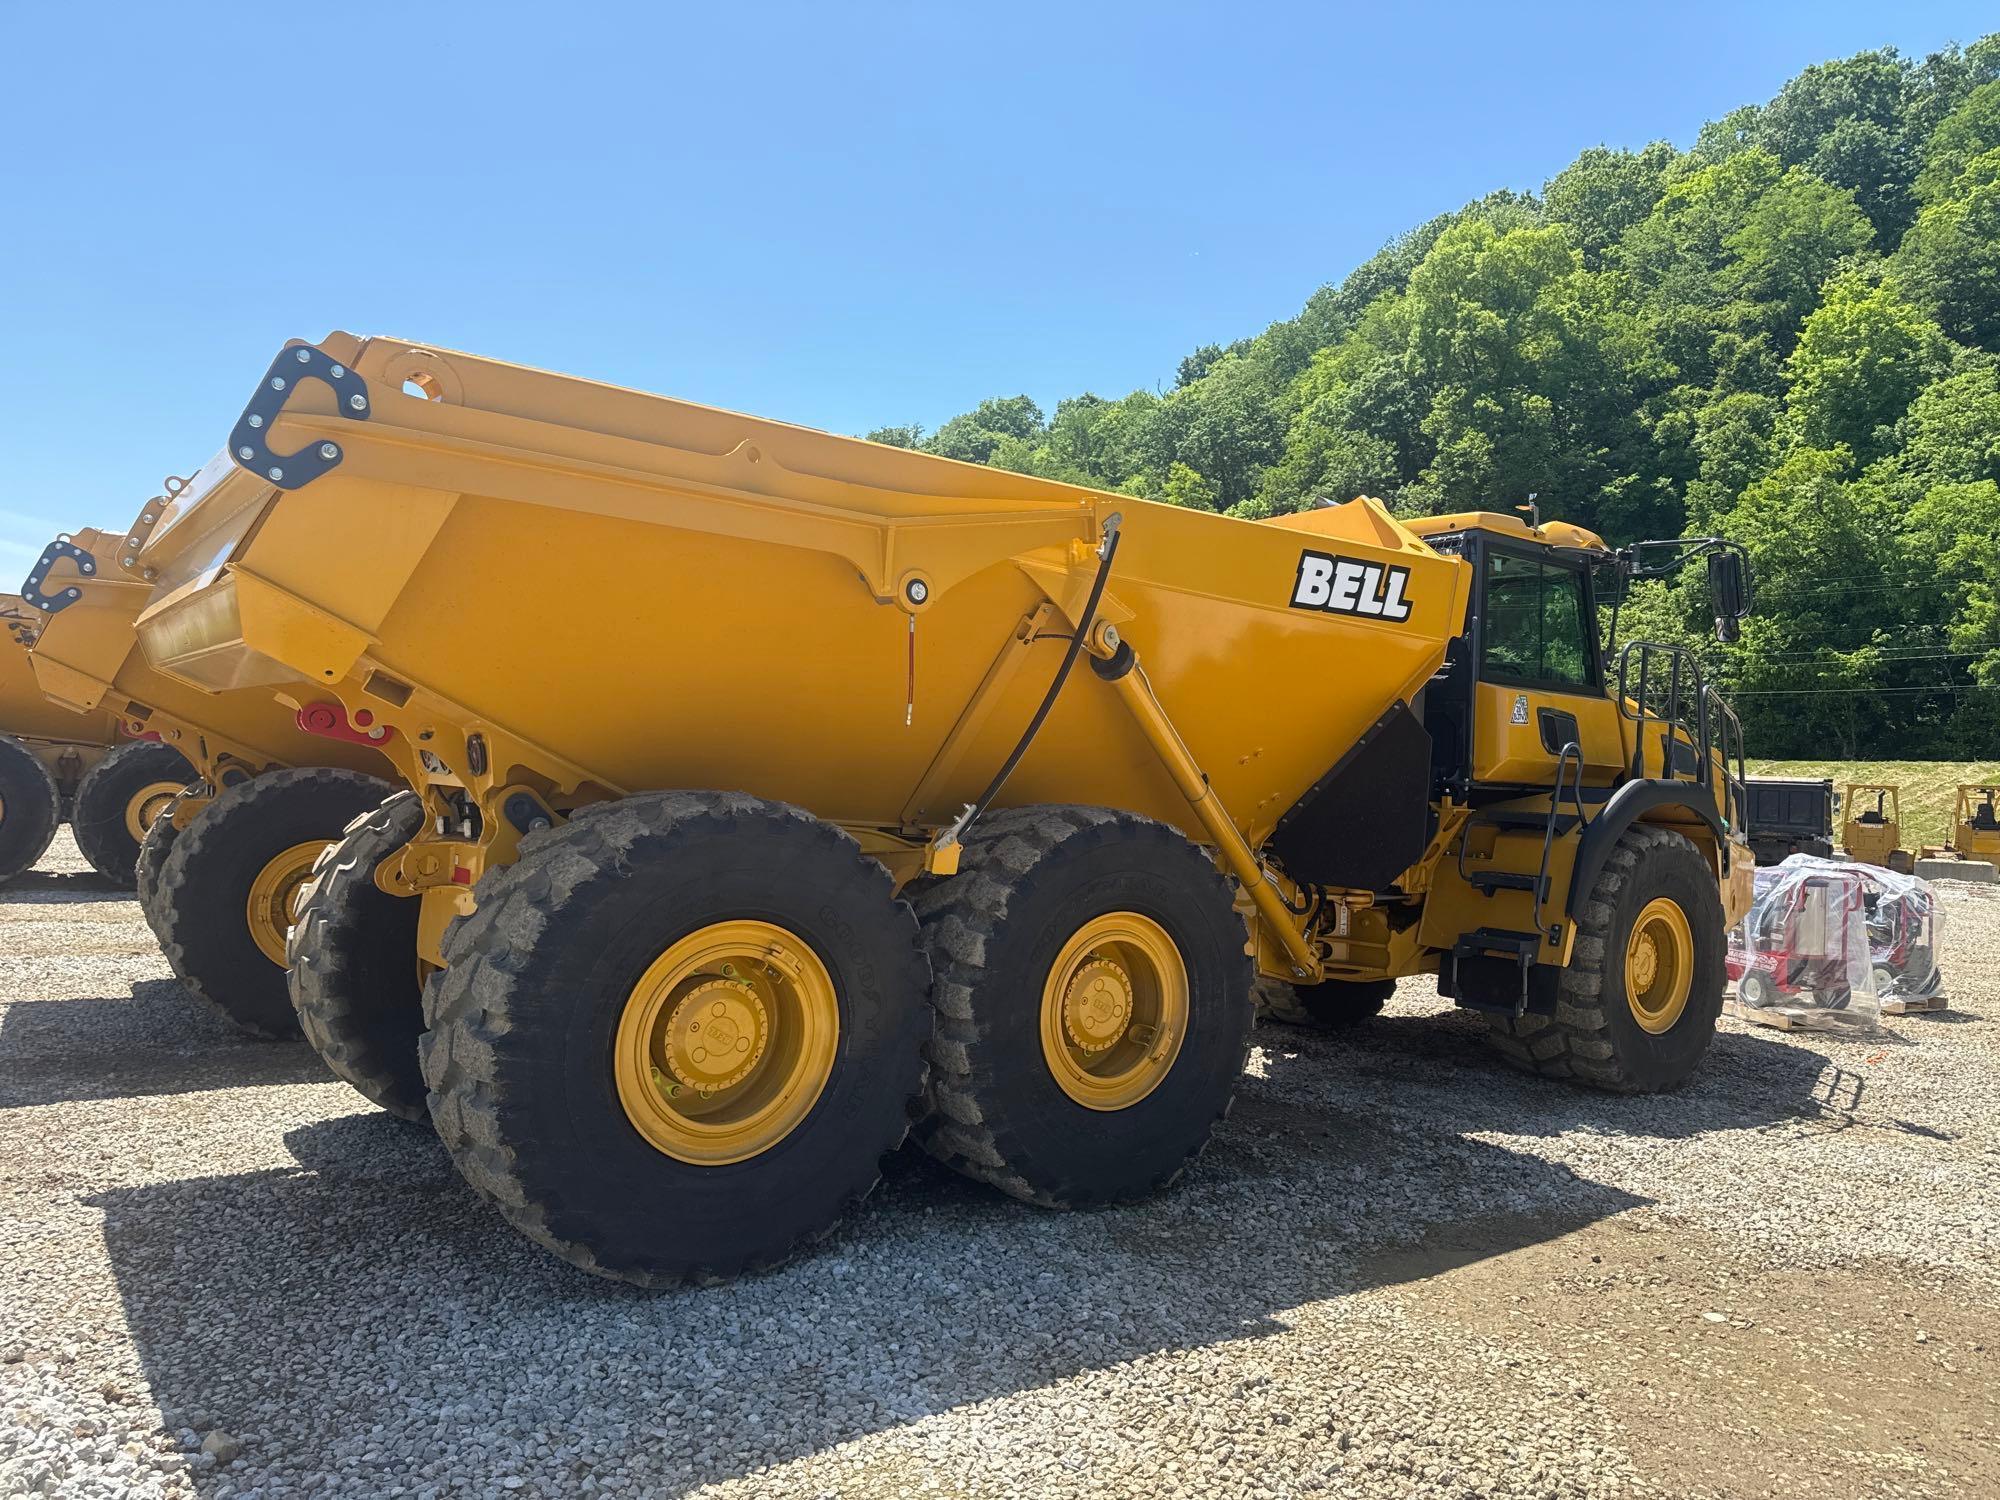 NEW BELL B30E ARTICULATED HAUL TRUCK SN 34110166x6, powered by diesel engine, equipped with Cab,